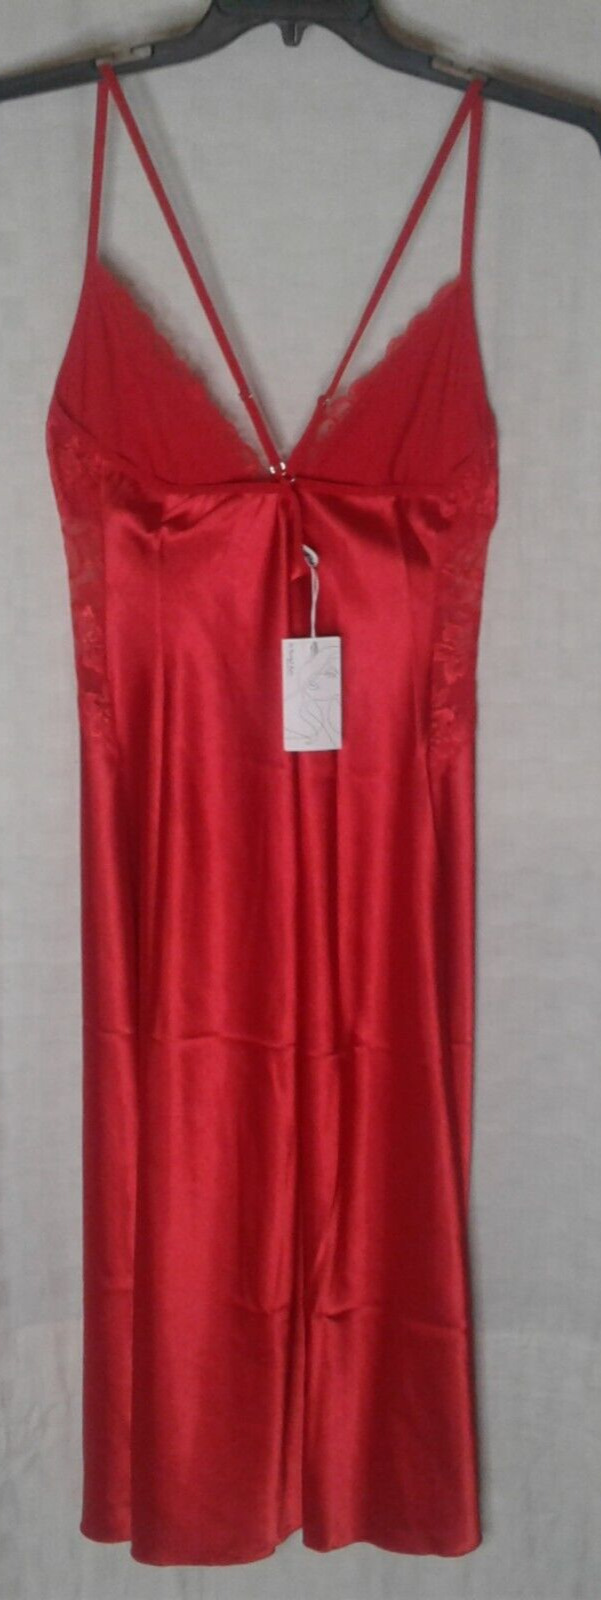 Etosell Comfort Beauty Wear Red Satin & Lace Spaghetti  Strap  Intimate  Gown XL